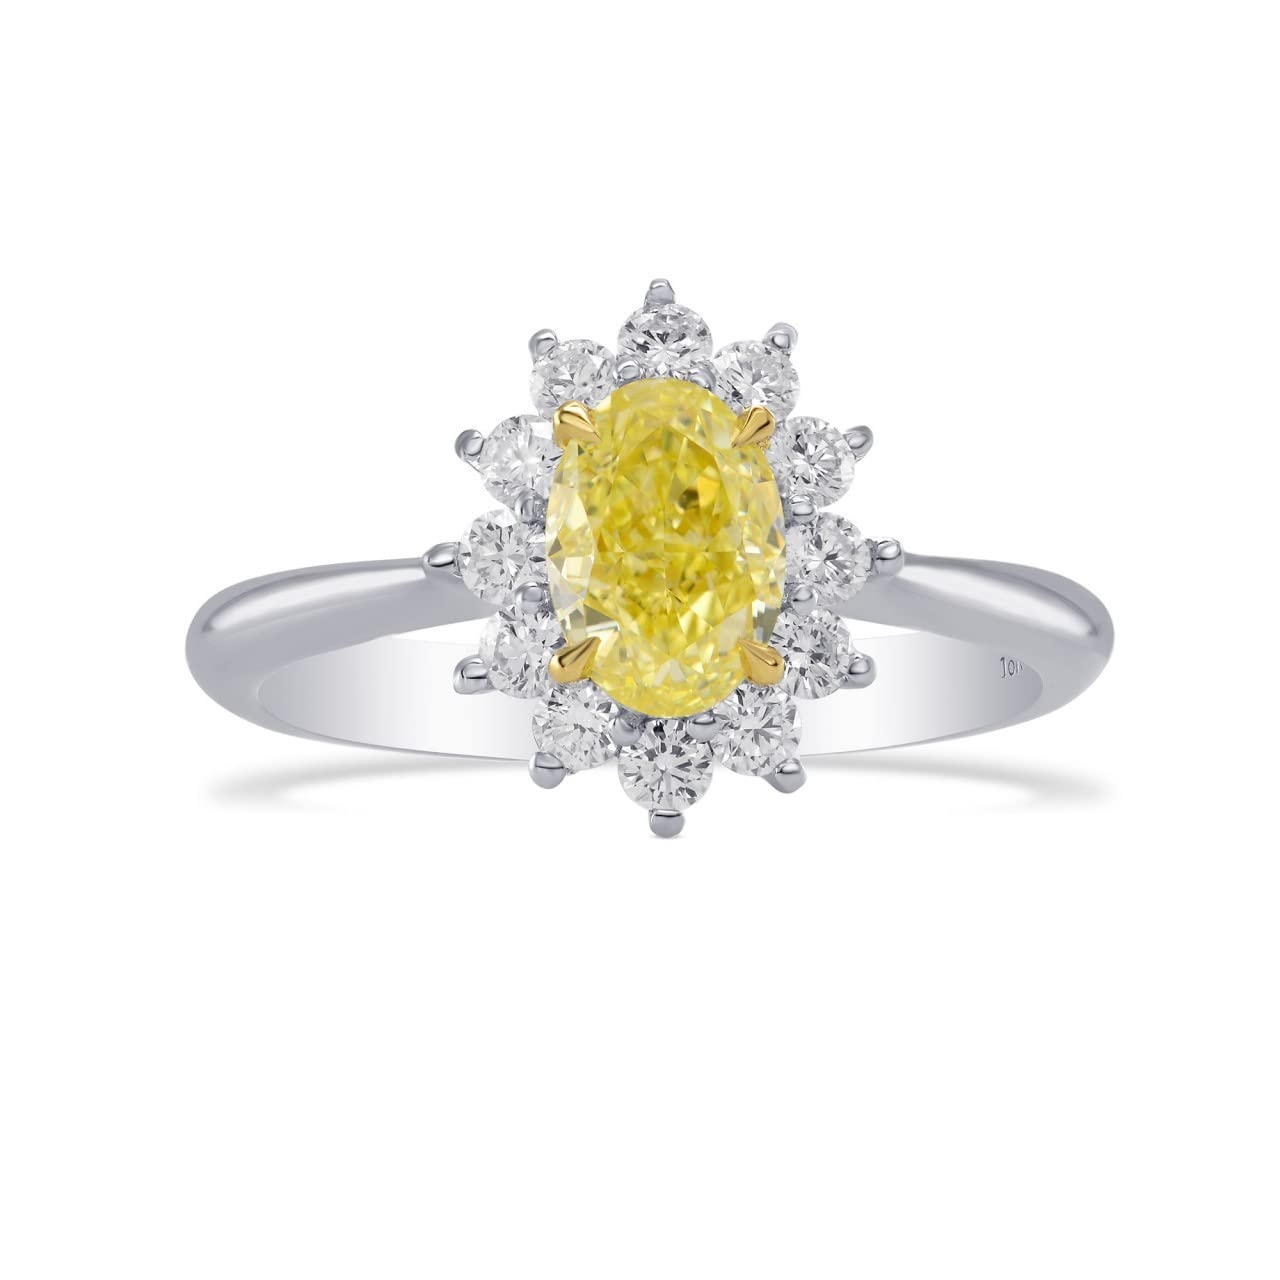 Leibish & co 1.37Cts Yellow Diamond Engagement Halo Ring Set in 18K White Yellow Gold GIA Loose Stone Birthday Natural Gift For Her Real Engagement Anniversary Wedding